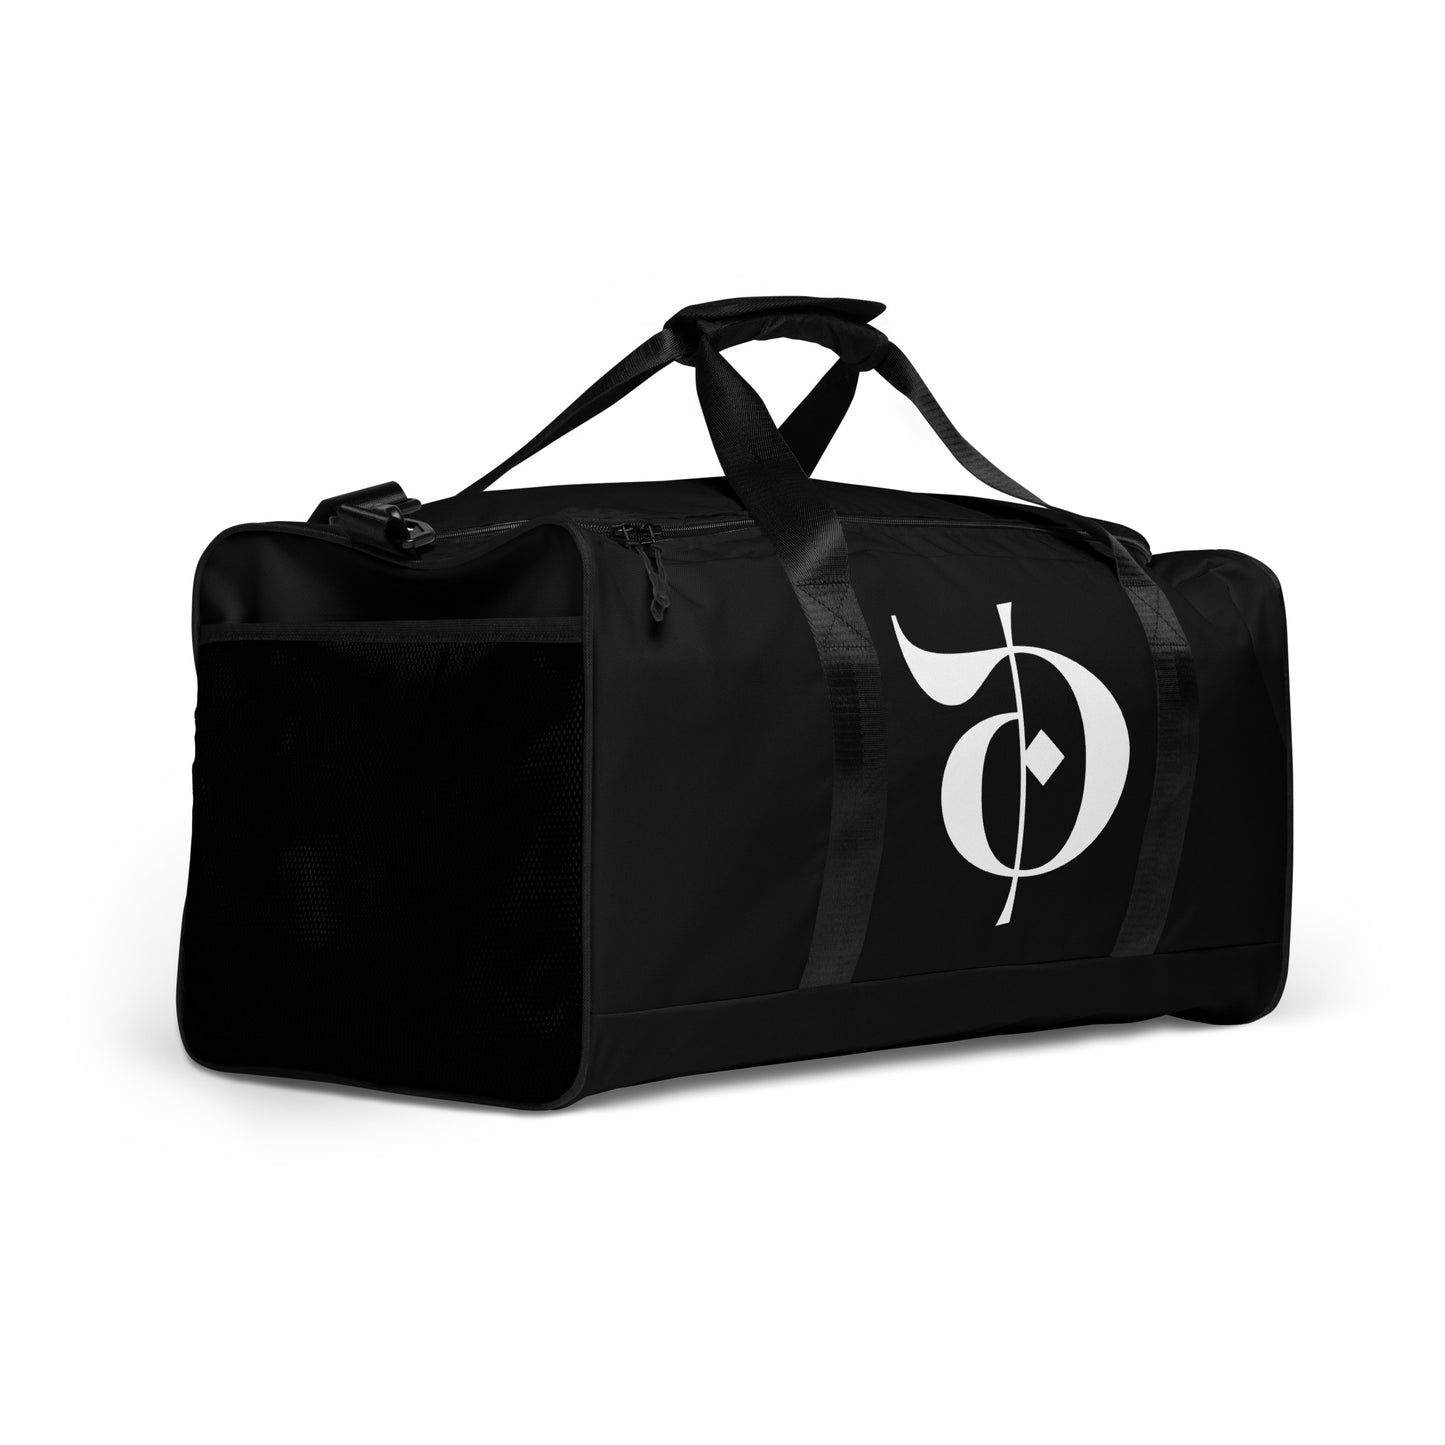 Personalized  Monogrammed  Duffle Bag